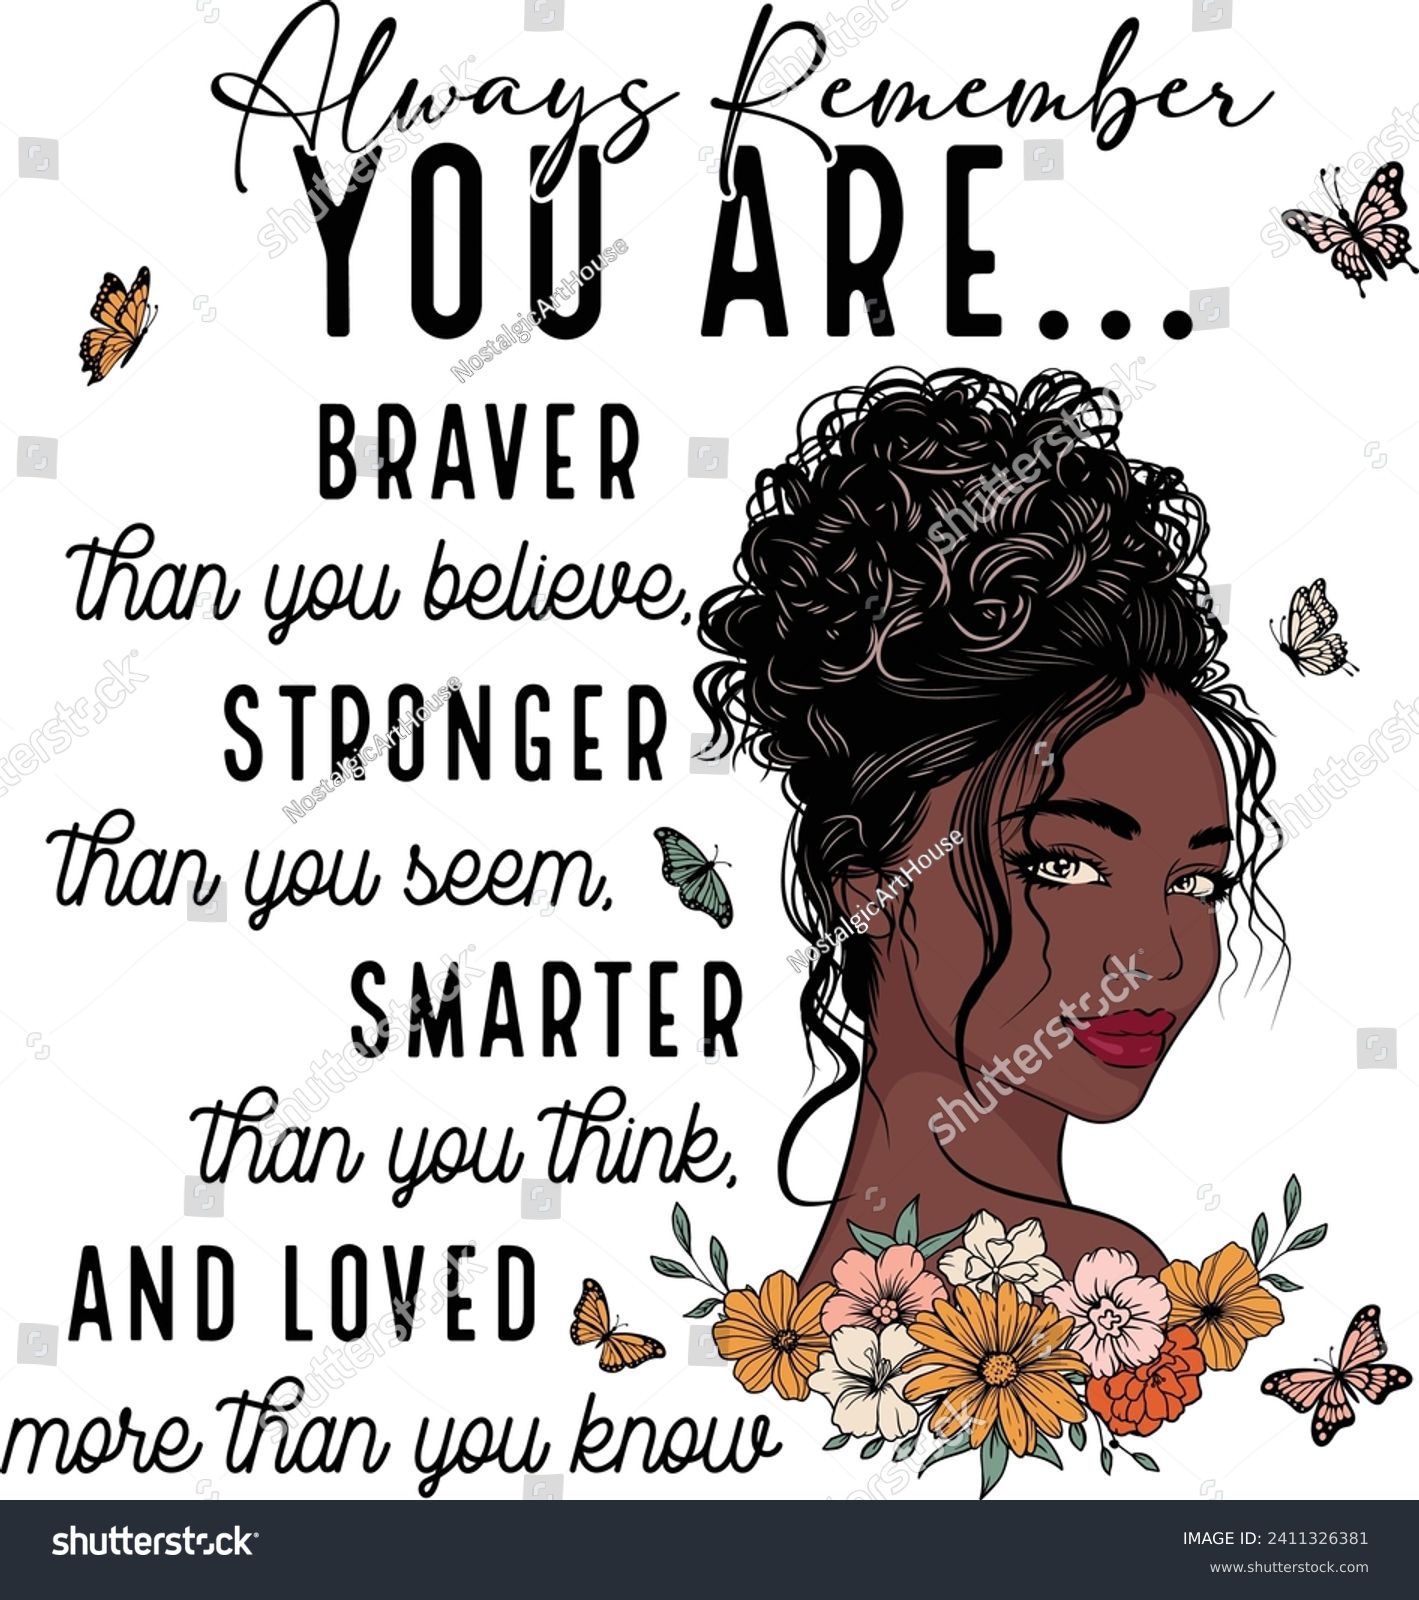 SVG of Black girl, Floral woman, Flower girl, Melanin woman, Always remember You are braver than you believe.	
 svg